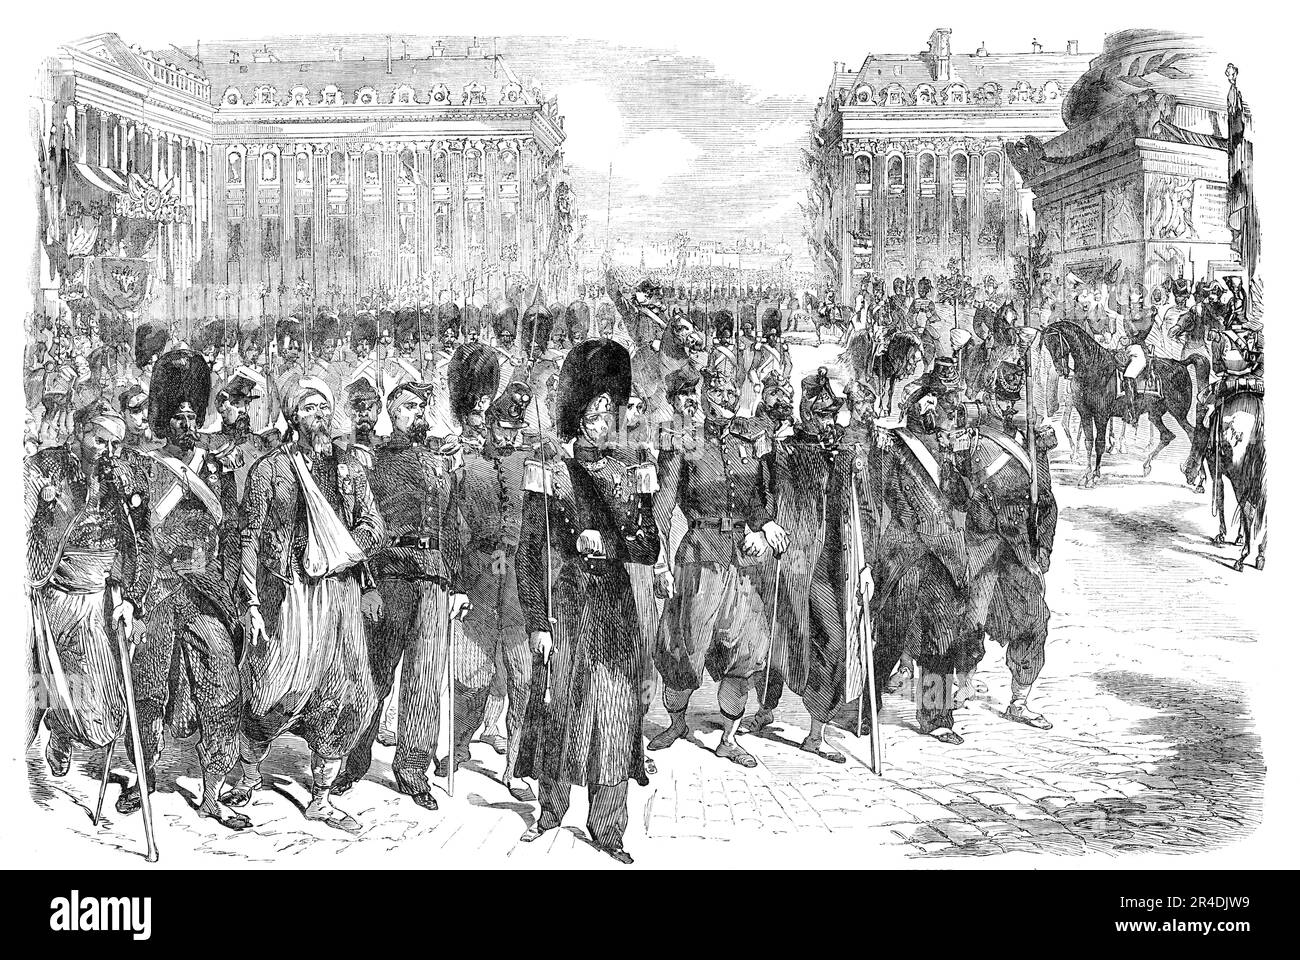 The Crimean Troops Defiling at the Foot of the Column, Place Vendome, 1856. Wounded French soldiers in Paris. 'The soiled uniforms, but still more the haggard and worn appearance of the men's swarthy faces, told a tale of suffering and endurance which drew tears from many of the spectators; and the intensity and earnestness of the cheering exceeded anything ever before heard in Paris. The flag of one of the regiments...was torn to ribbons; the white maculated with the blood stains...and the eagle which surmounts the shaft showed, by one of its wings shot off, the fierceness of the struggle it Stock Photo